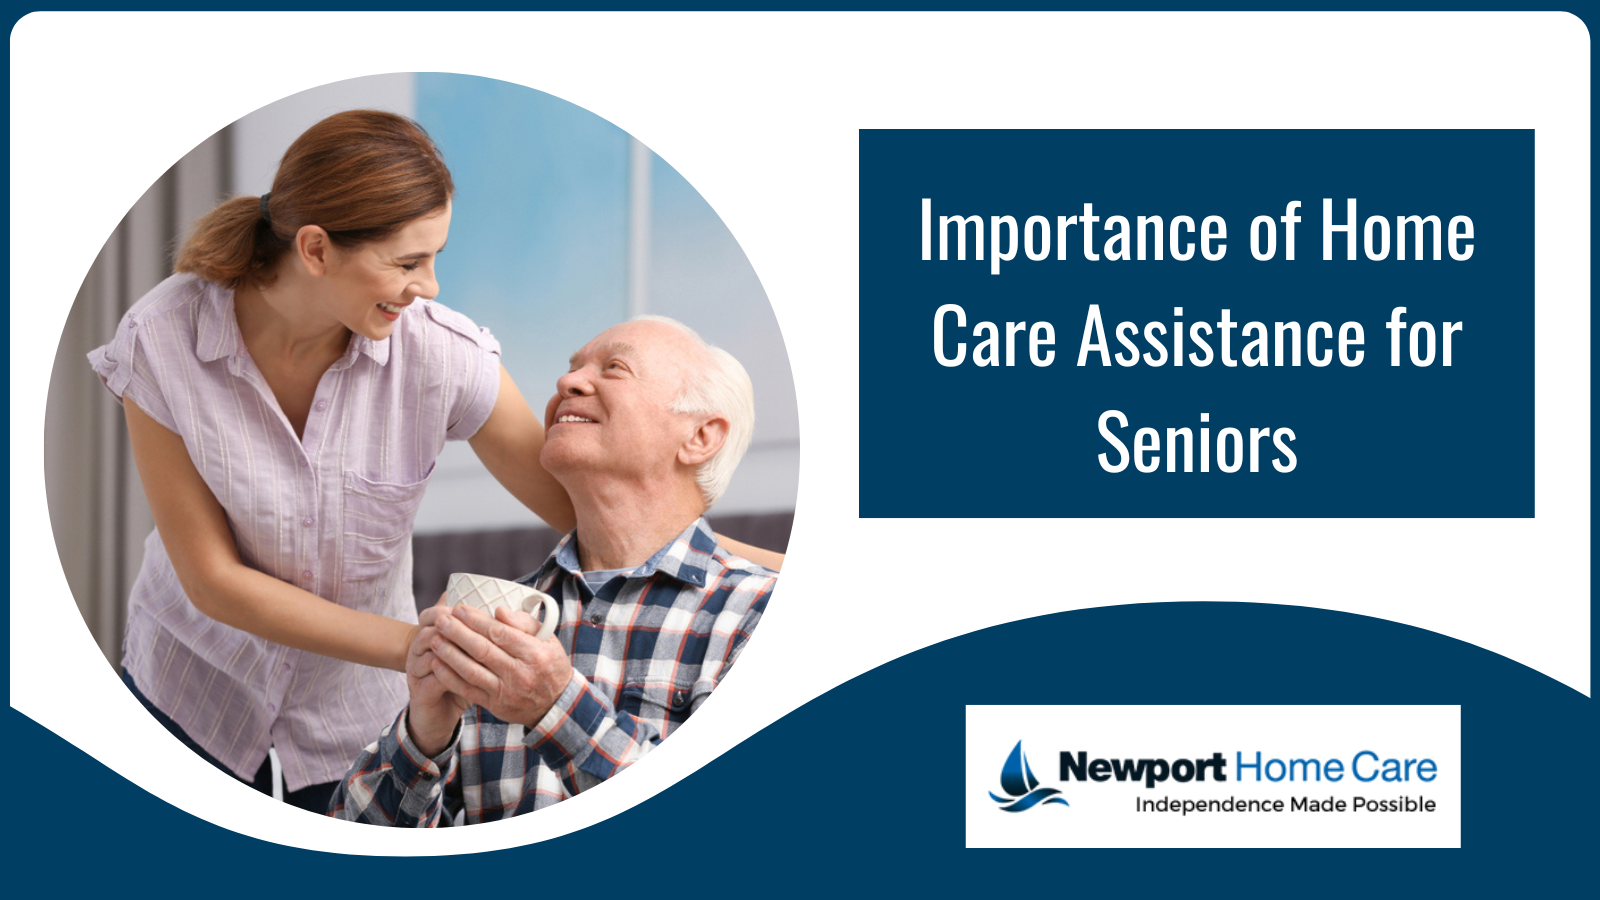 Importance of Home Care Assistance for Seniors